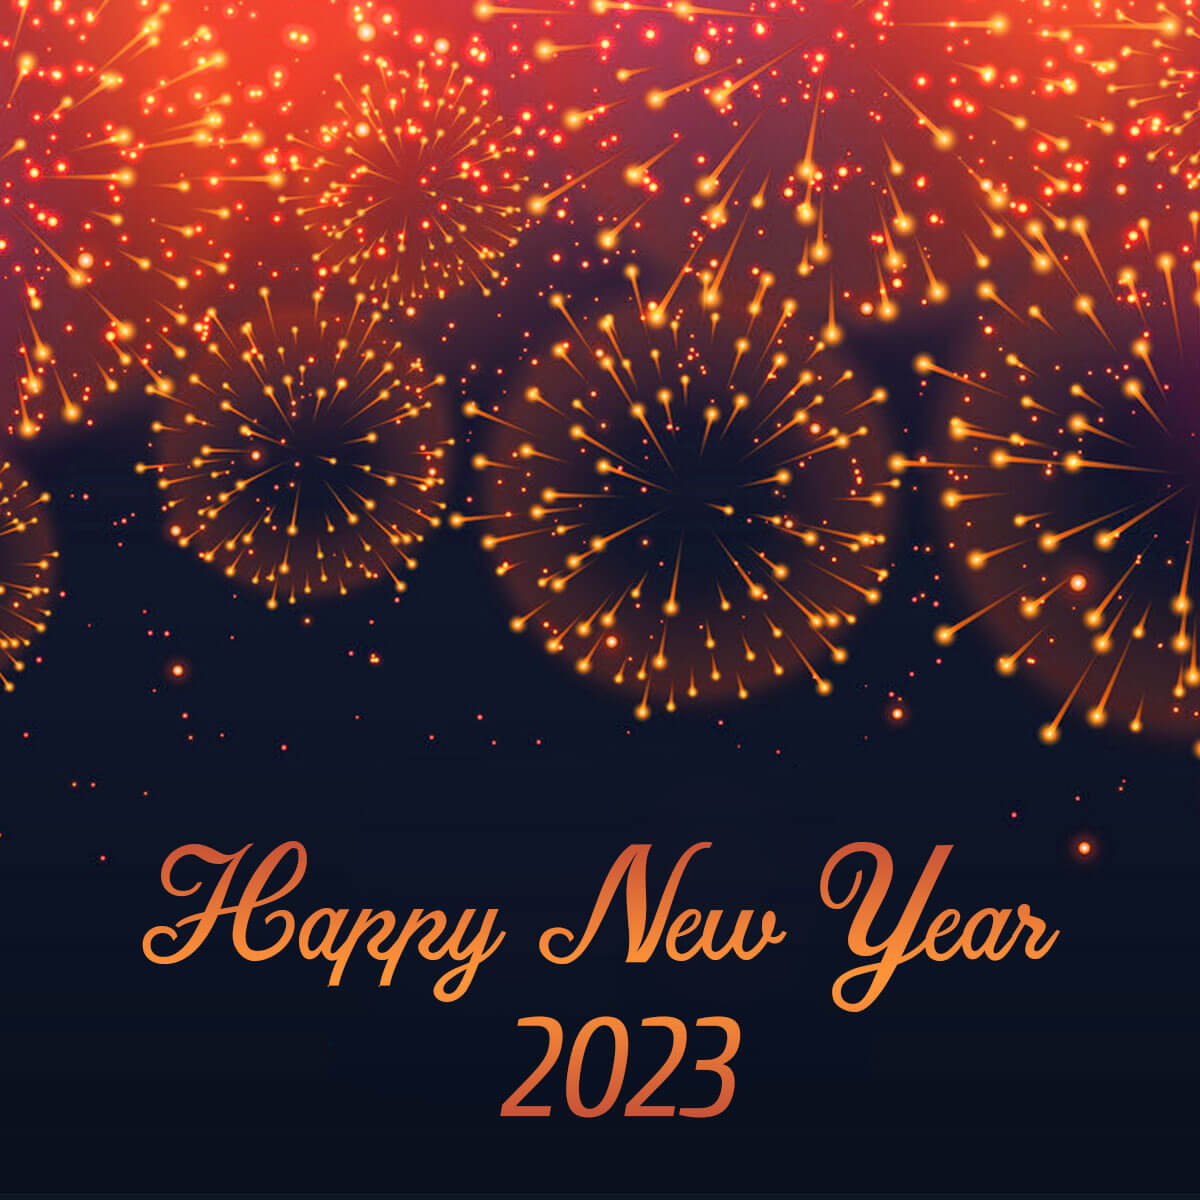 Happy new year 2023 crackers explosion background - Pngfreepic